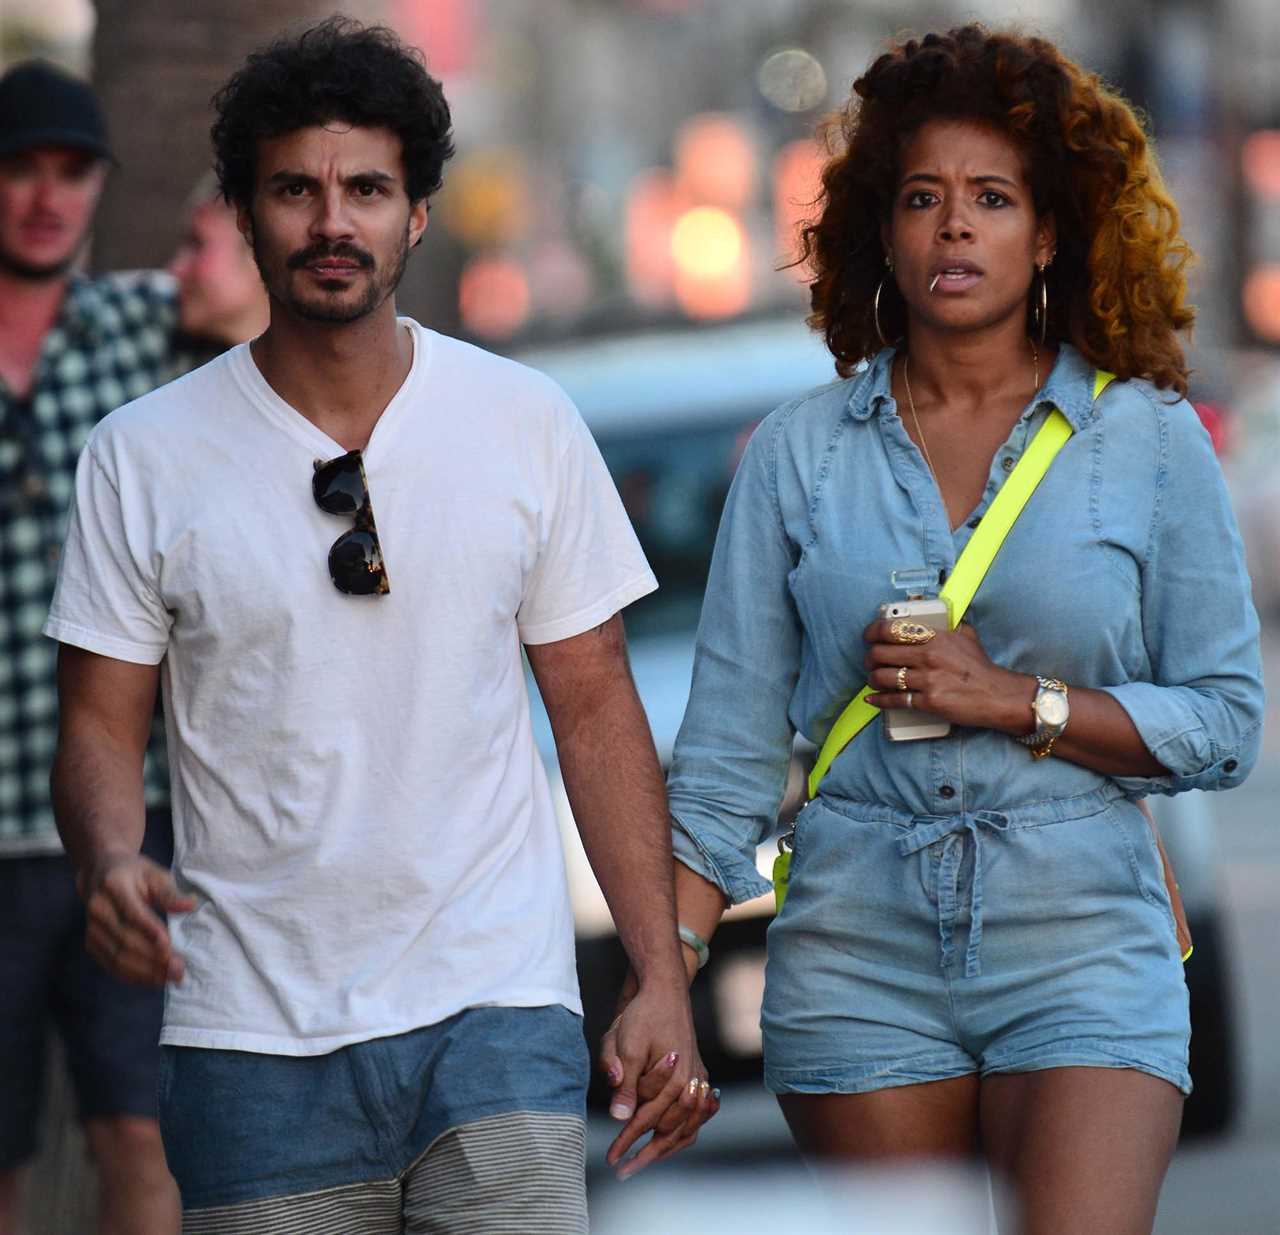 As Kelis’ husband Mike Mora dies of stomach cancer – the 5 early warning signs to watch for